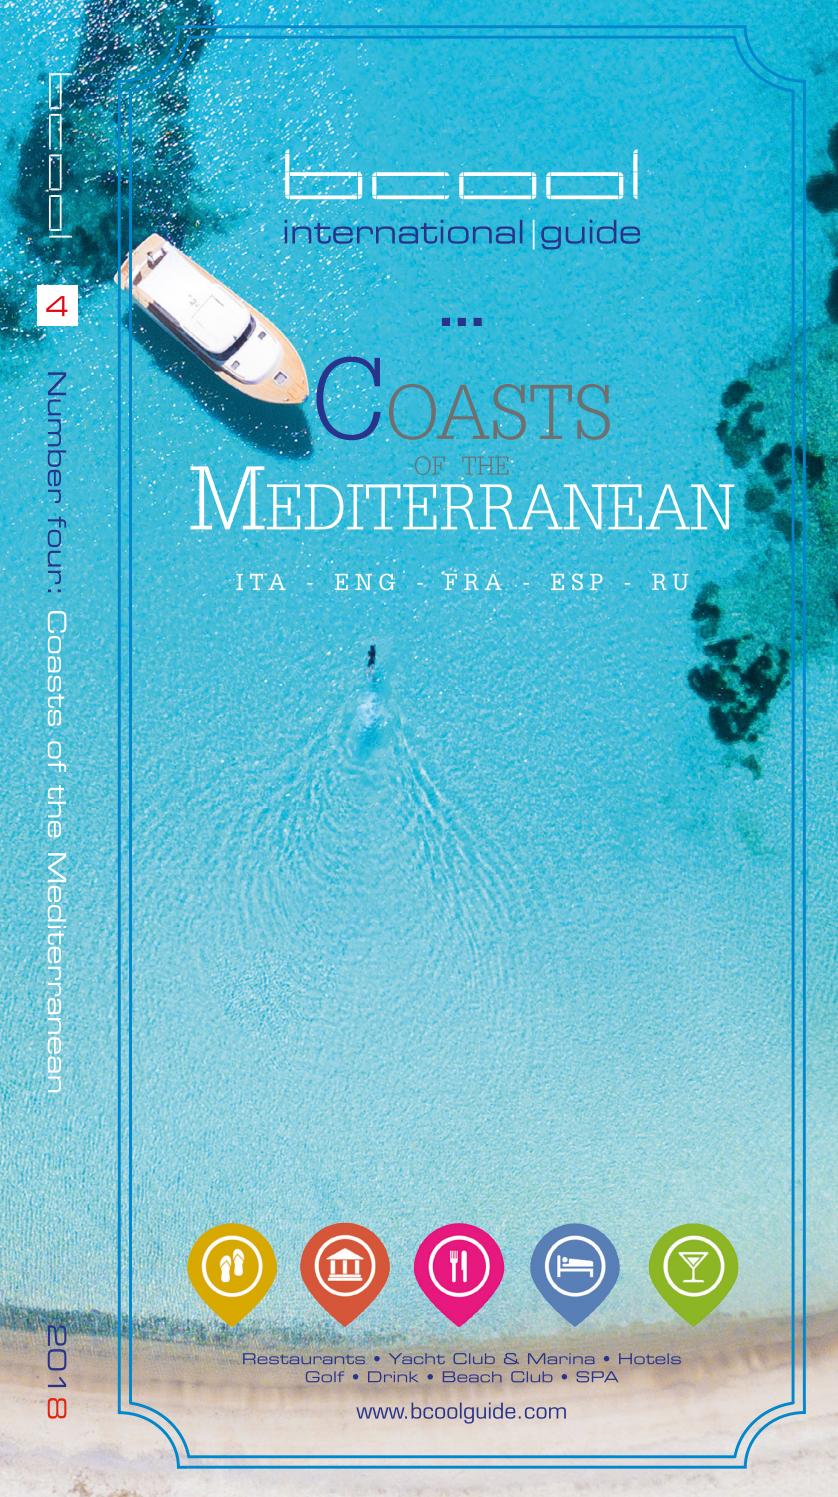 Table Pour Petit Espace Charmant 2018 Bcool Guide "coasts Of the Mediterrean" by Bcool City